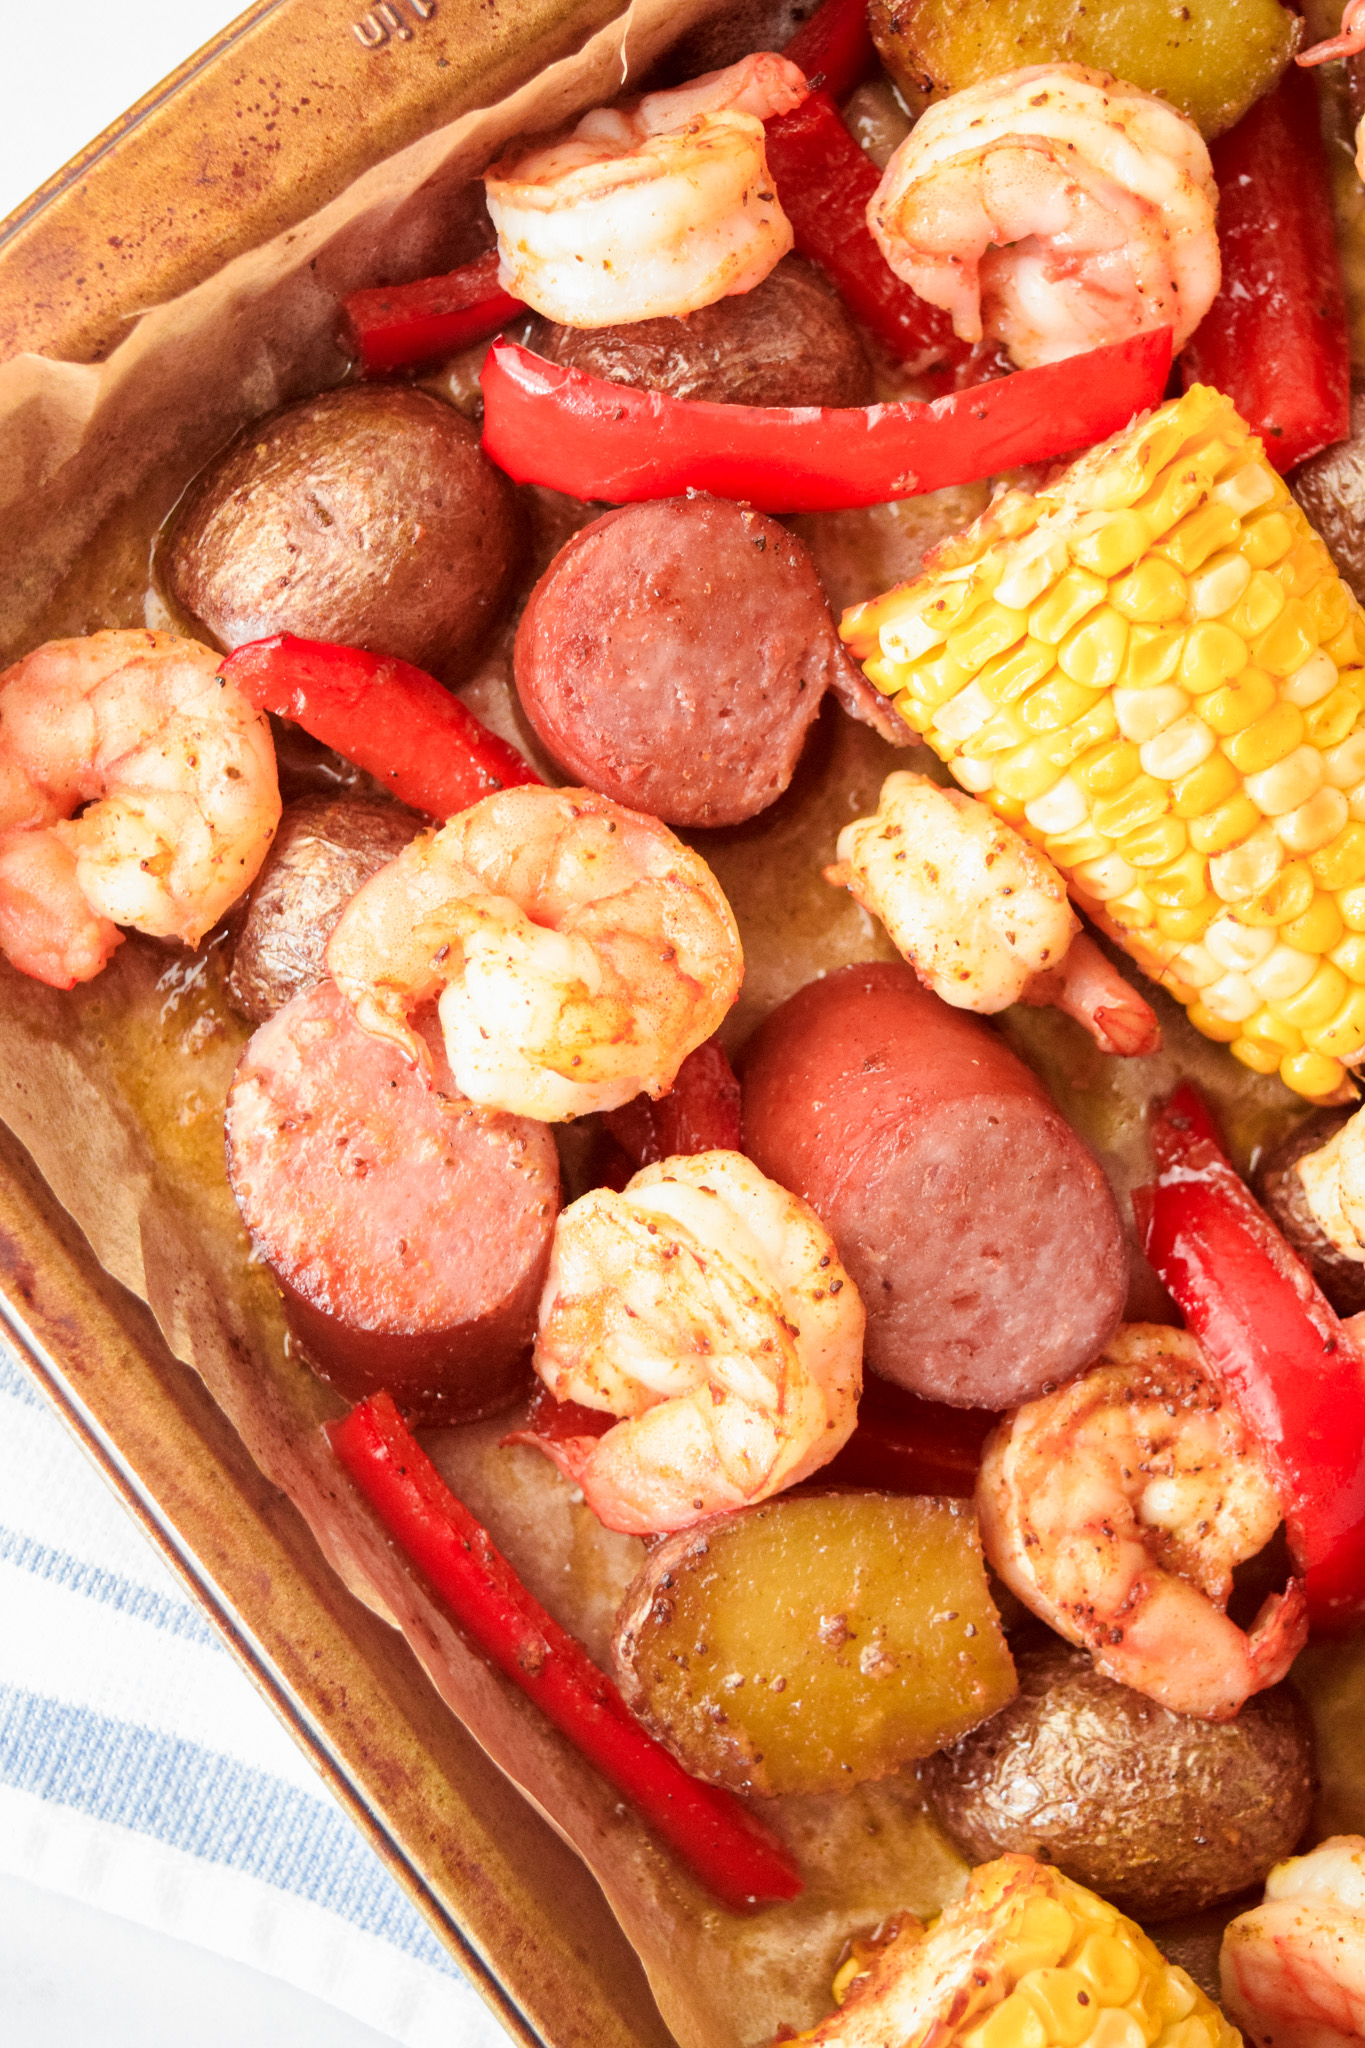 Roasted Shrimp Boil on a Baking Sheet with Corn, Sausage, Potatoes, and Red Peppers